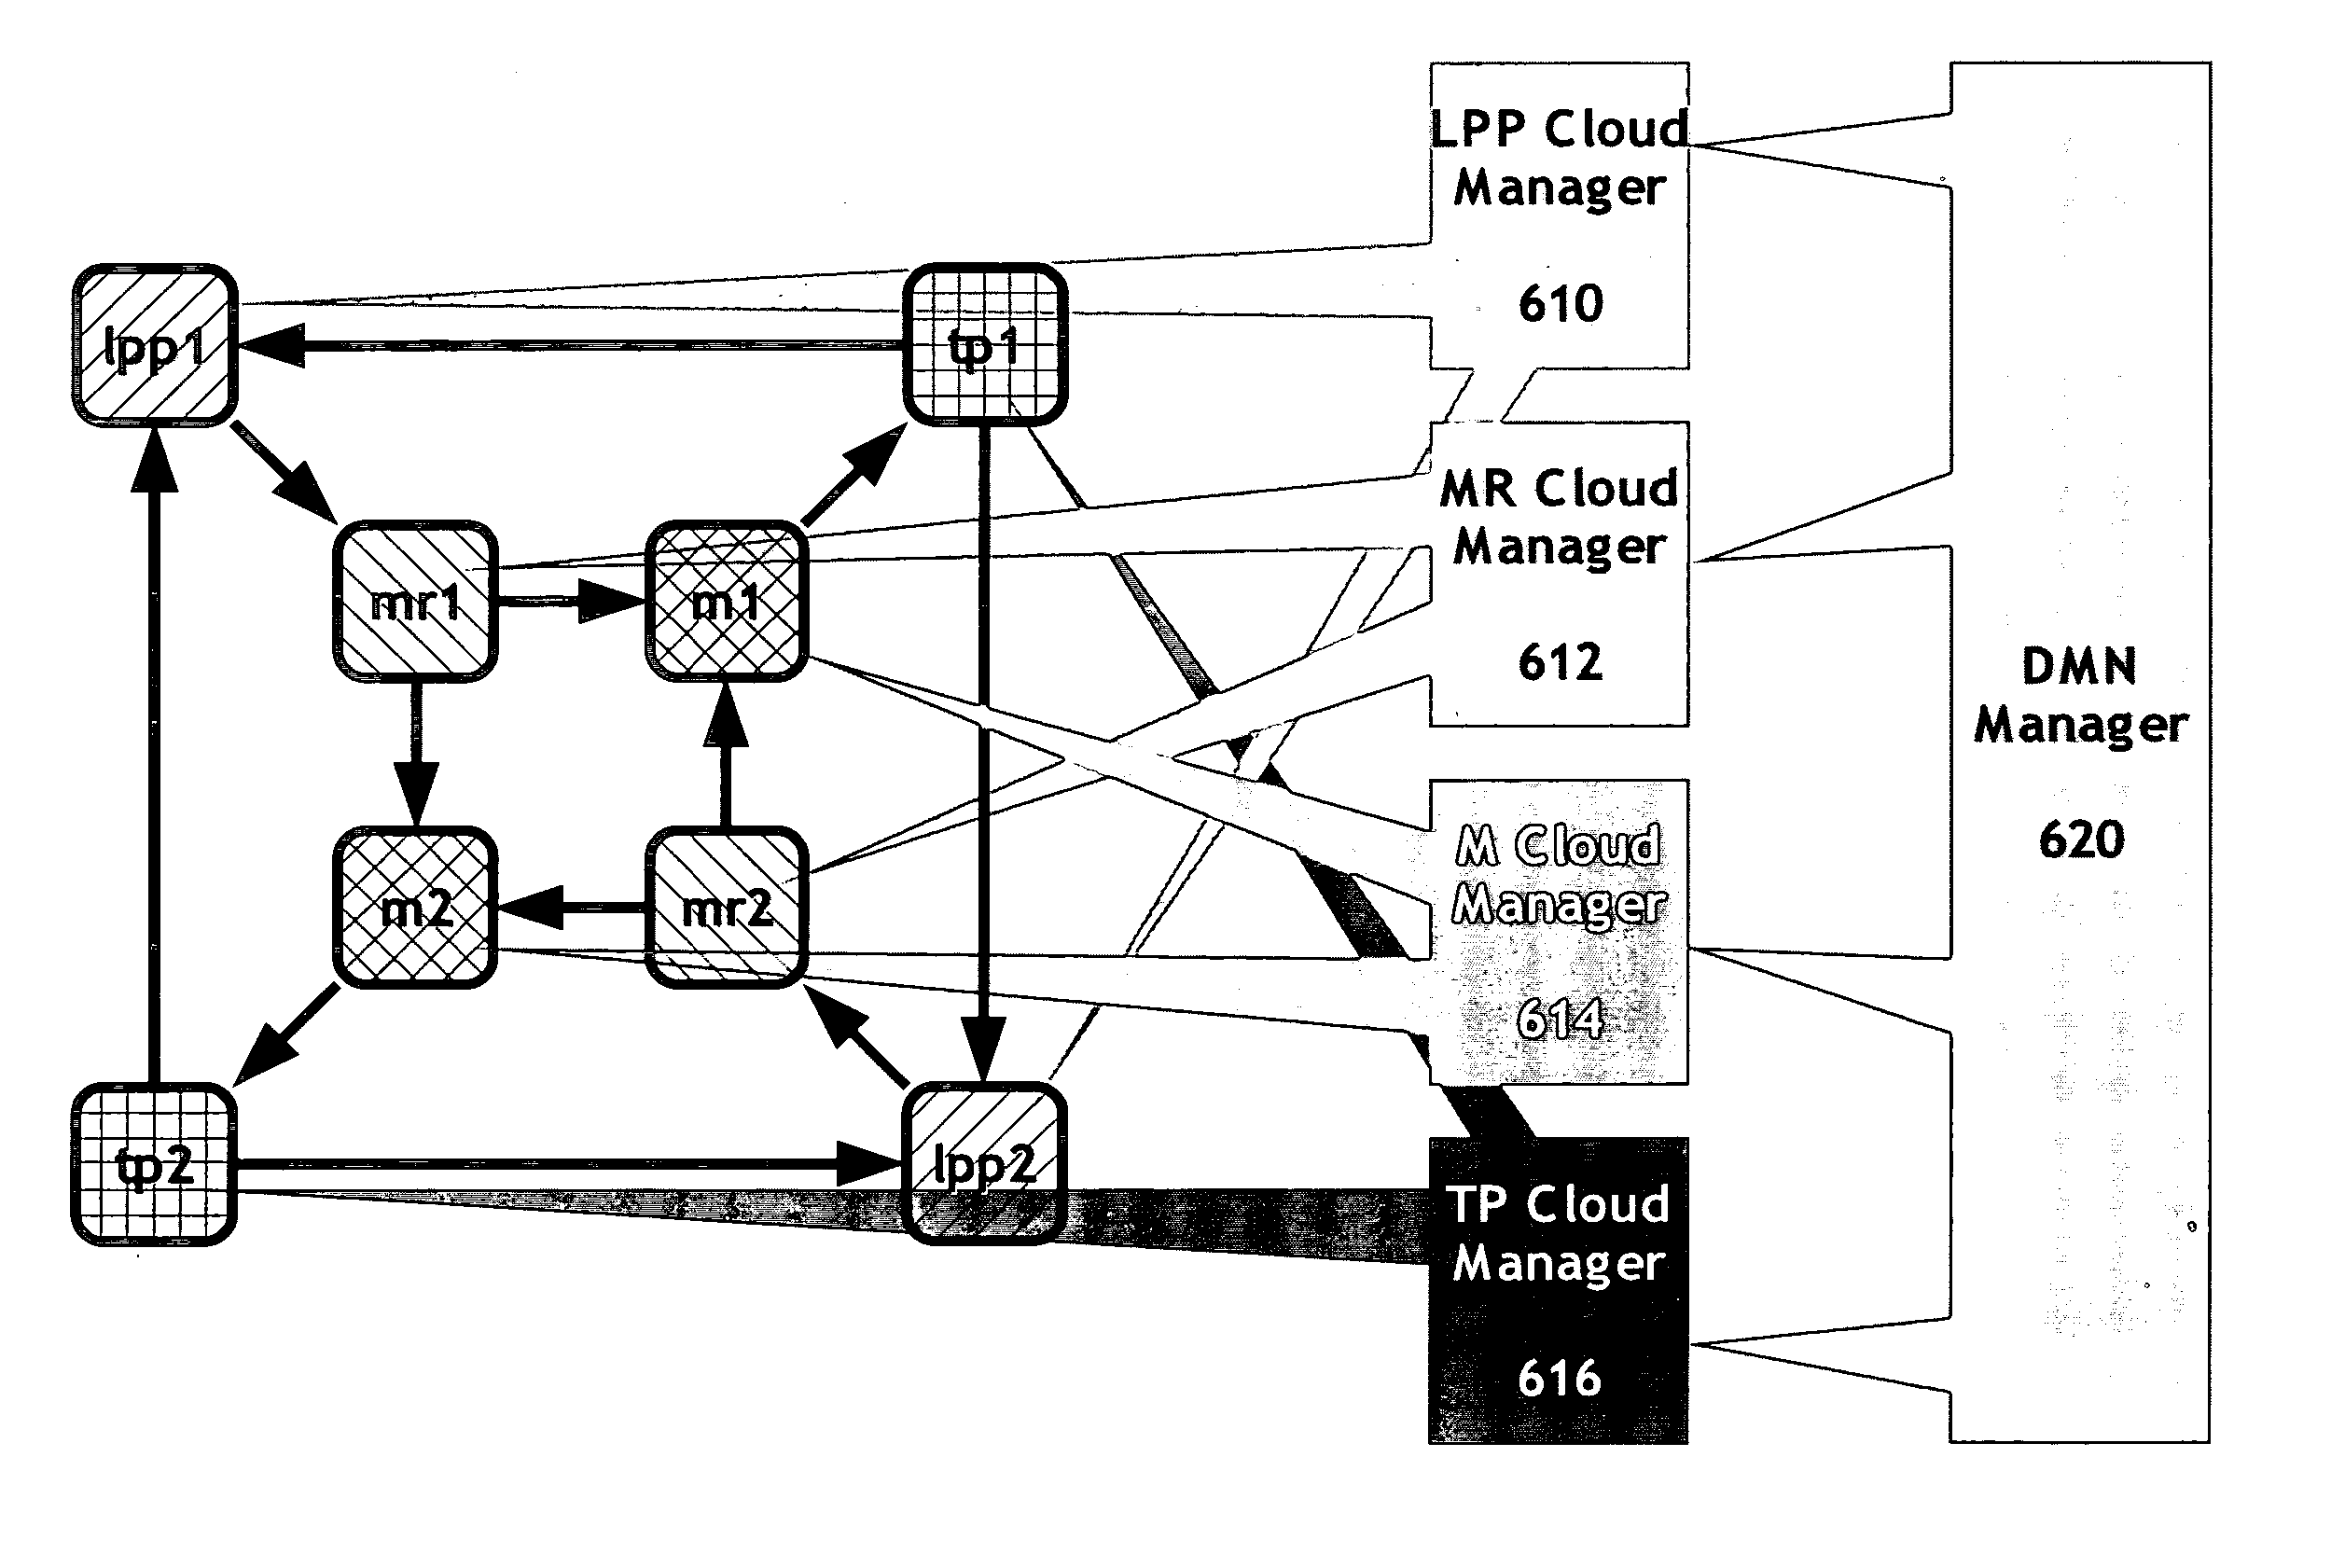 Self-managed distributed mediation networks